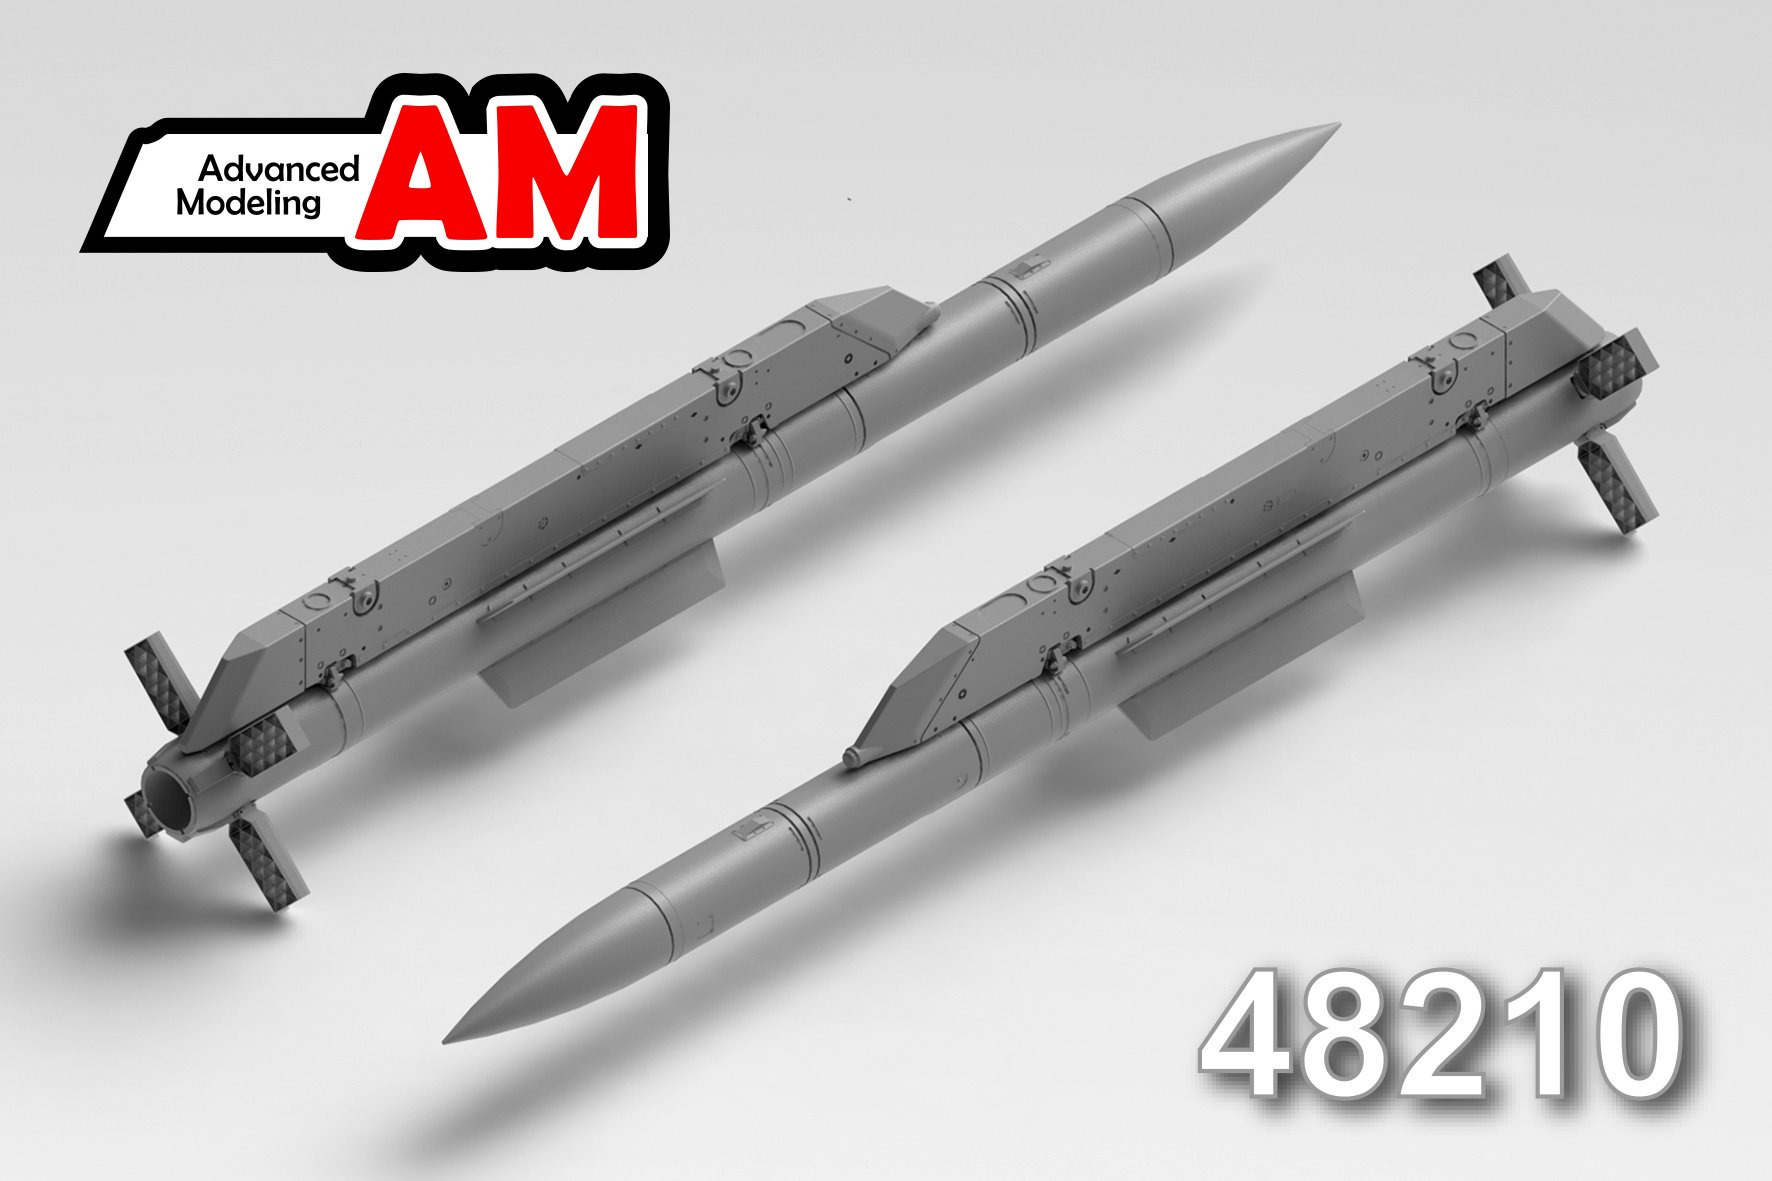 Additions (3D resin printing) 1/48 UR R-77 with AKU-170 launcher (Advanced Modeling) 